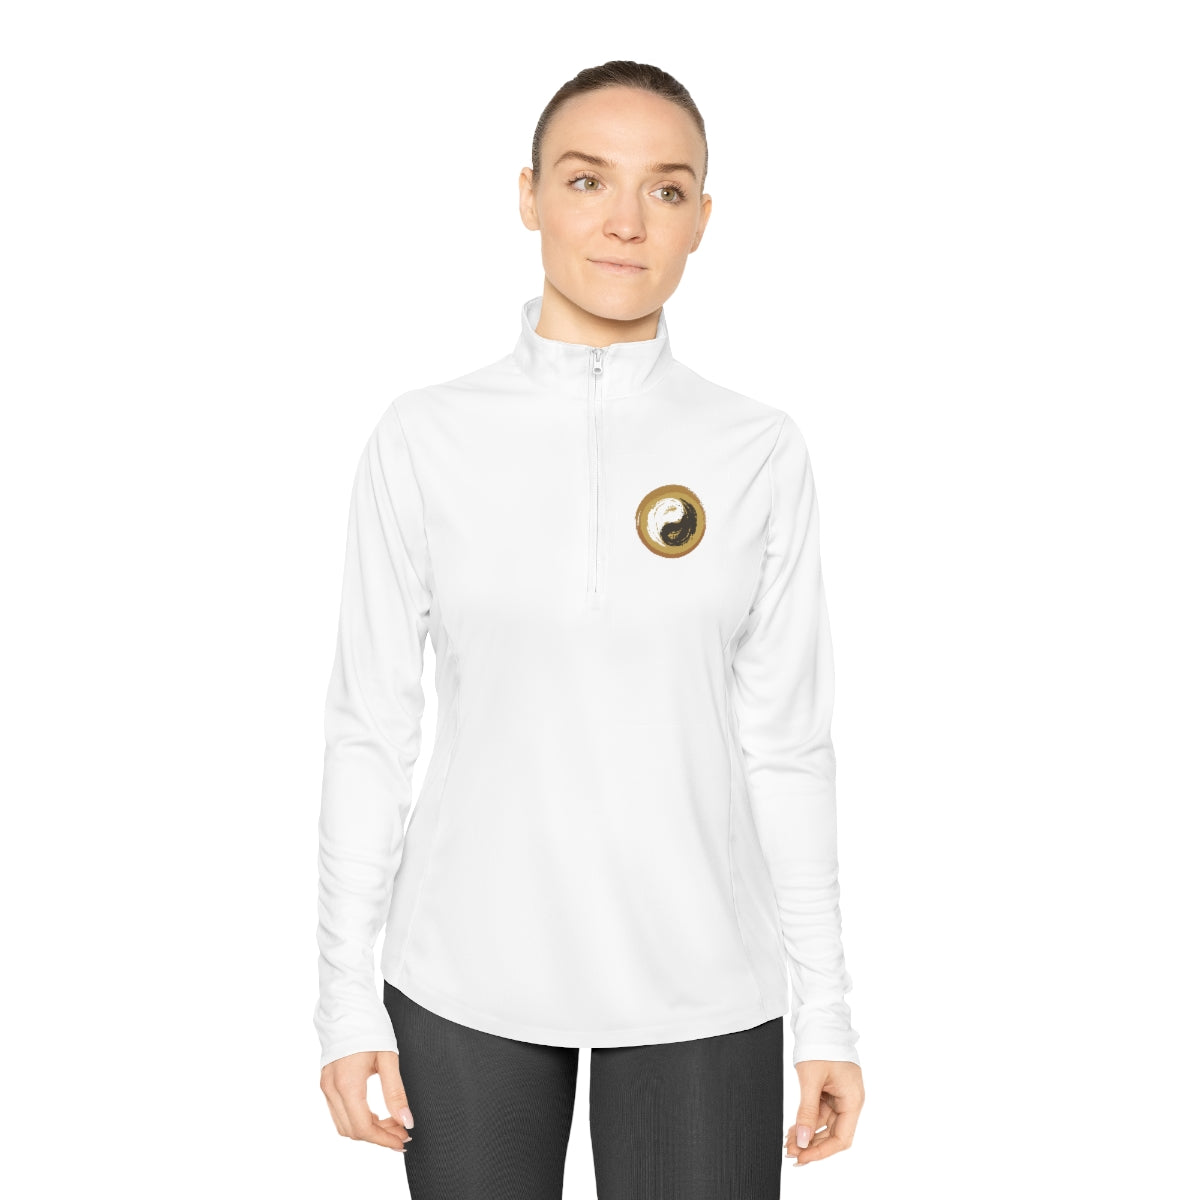 Ladies Quarter-Zip Pullover - Yoga Top - Personal Hour for Yoga and Meditations 